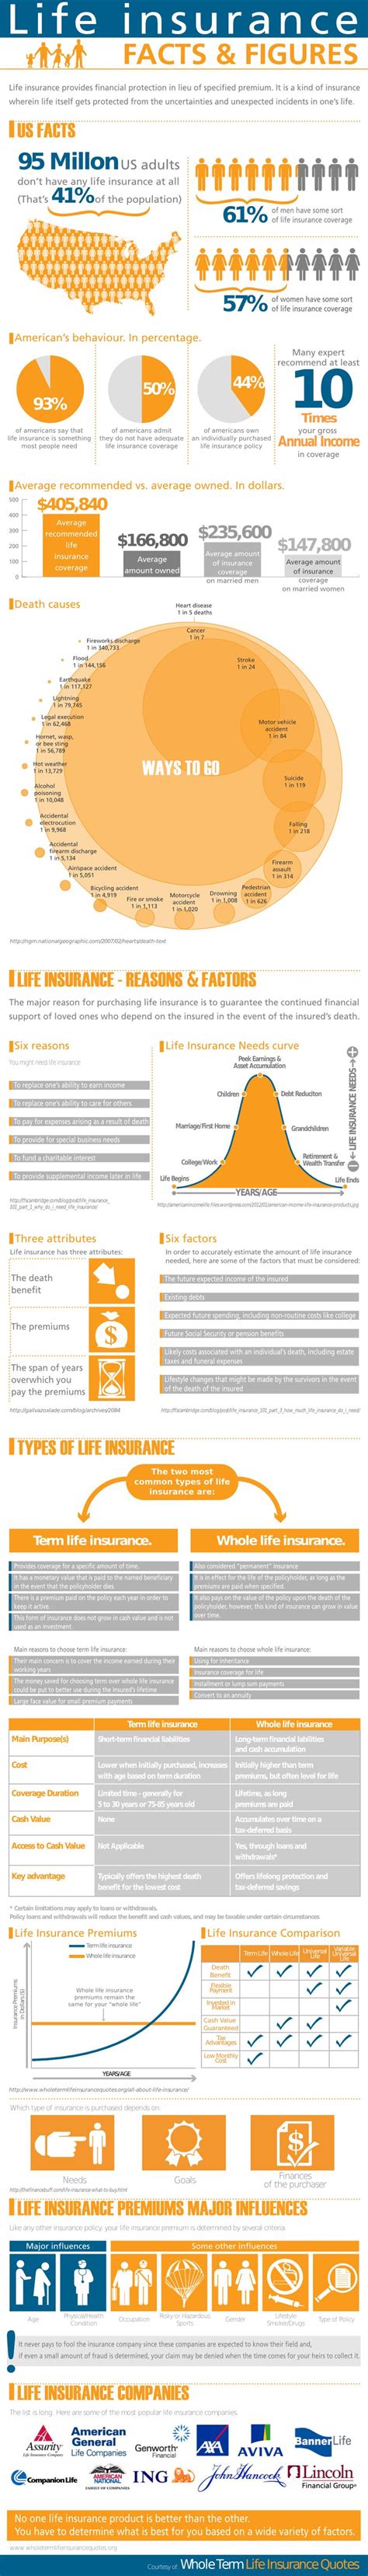 Other factors that can influence life insurance rates. 17+ images about WFG on Pinterest | Canada, Retirement and Jennifer jones